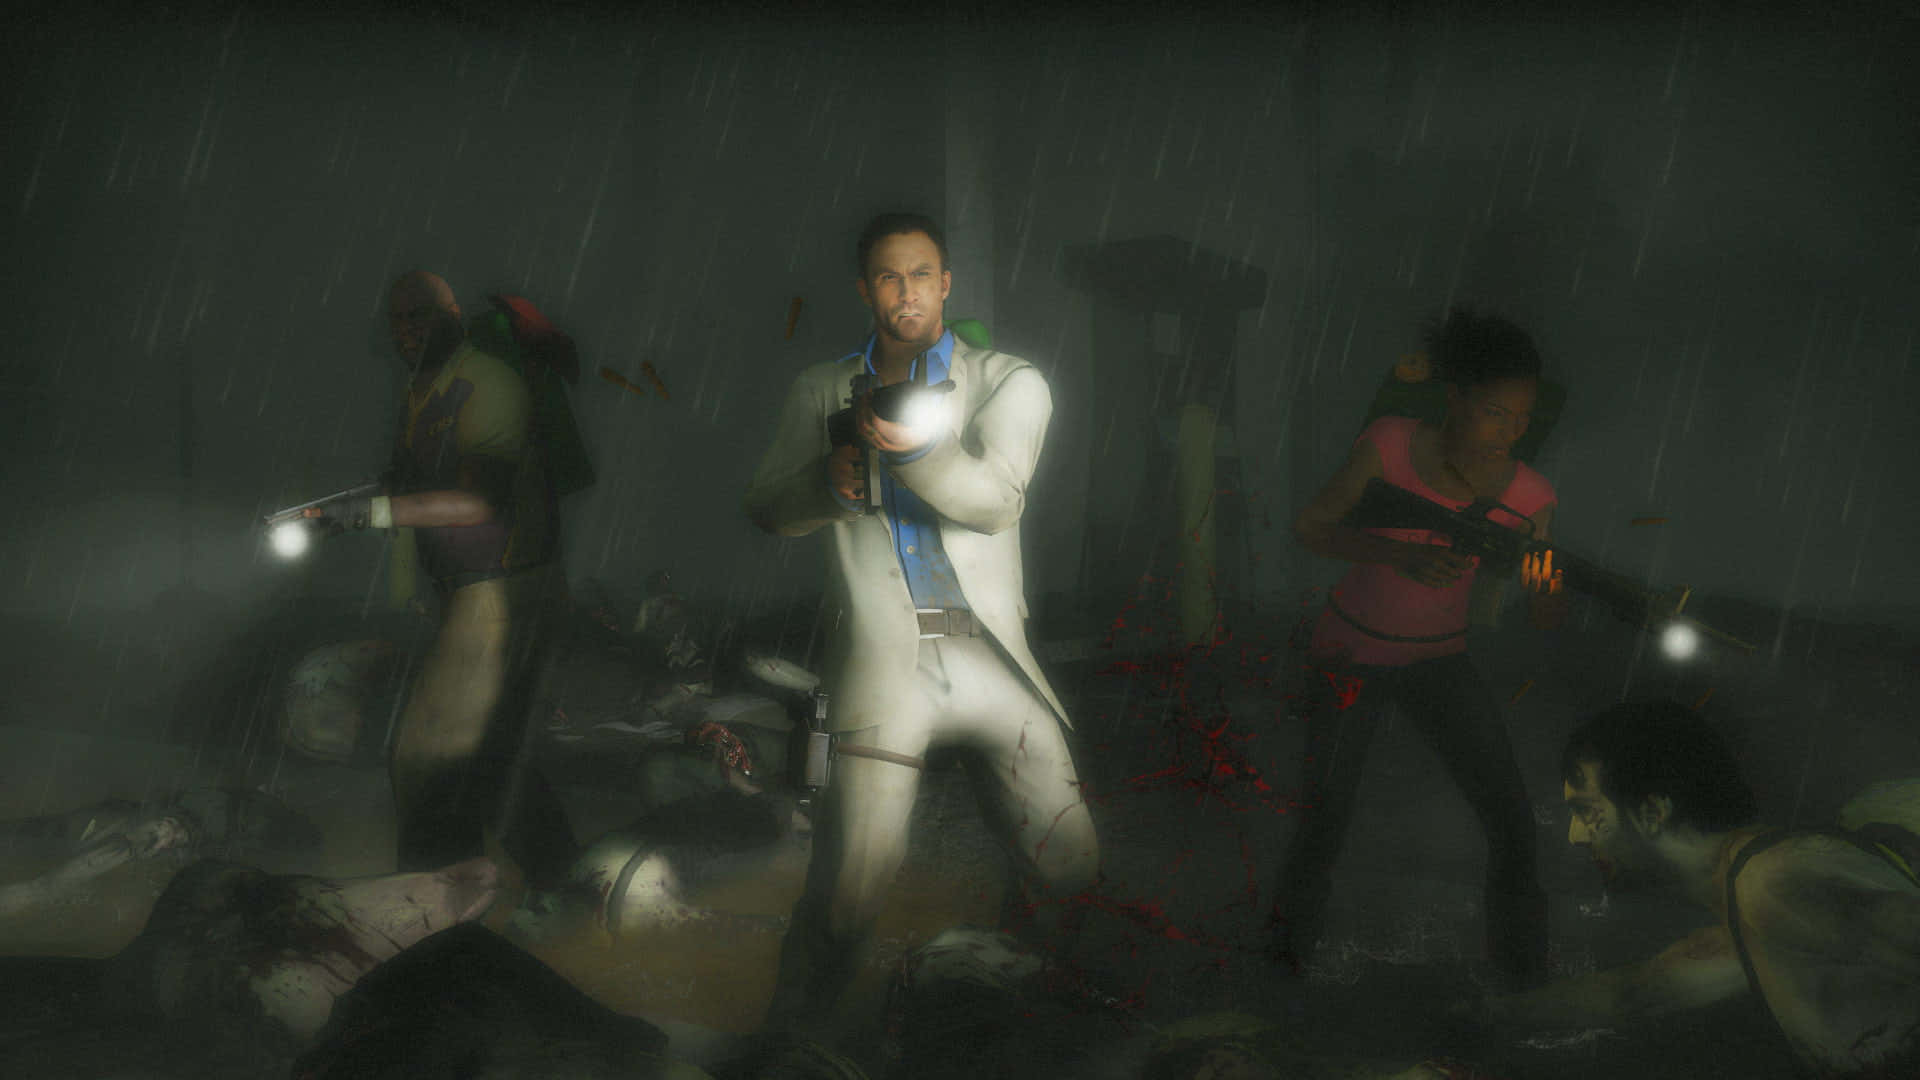 Caption: The Iconic Left 4 Dead Characters in Action Wallpaper